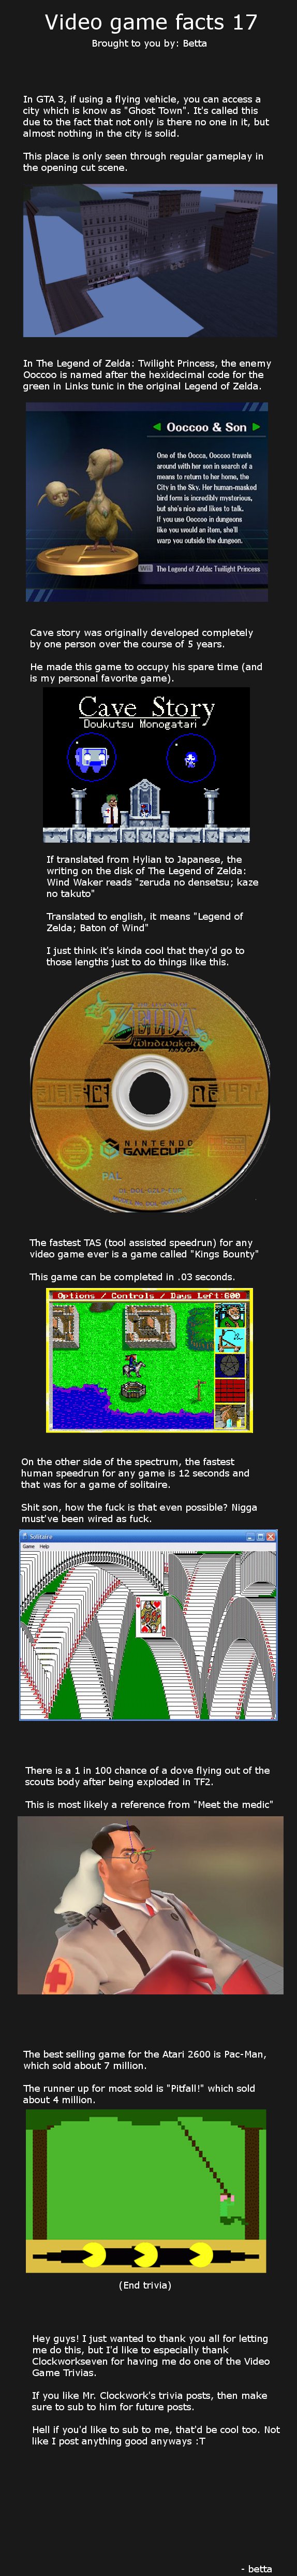 Video Game Facts 17